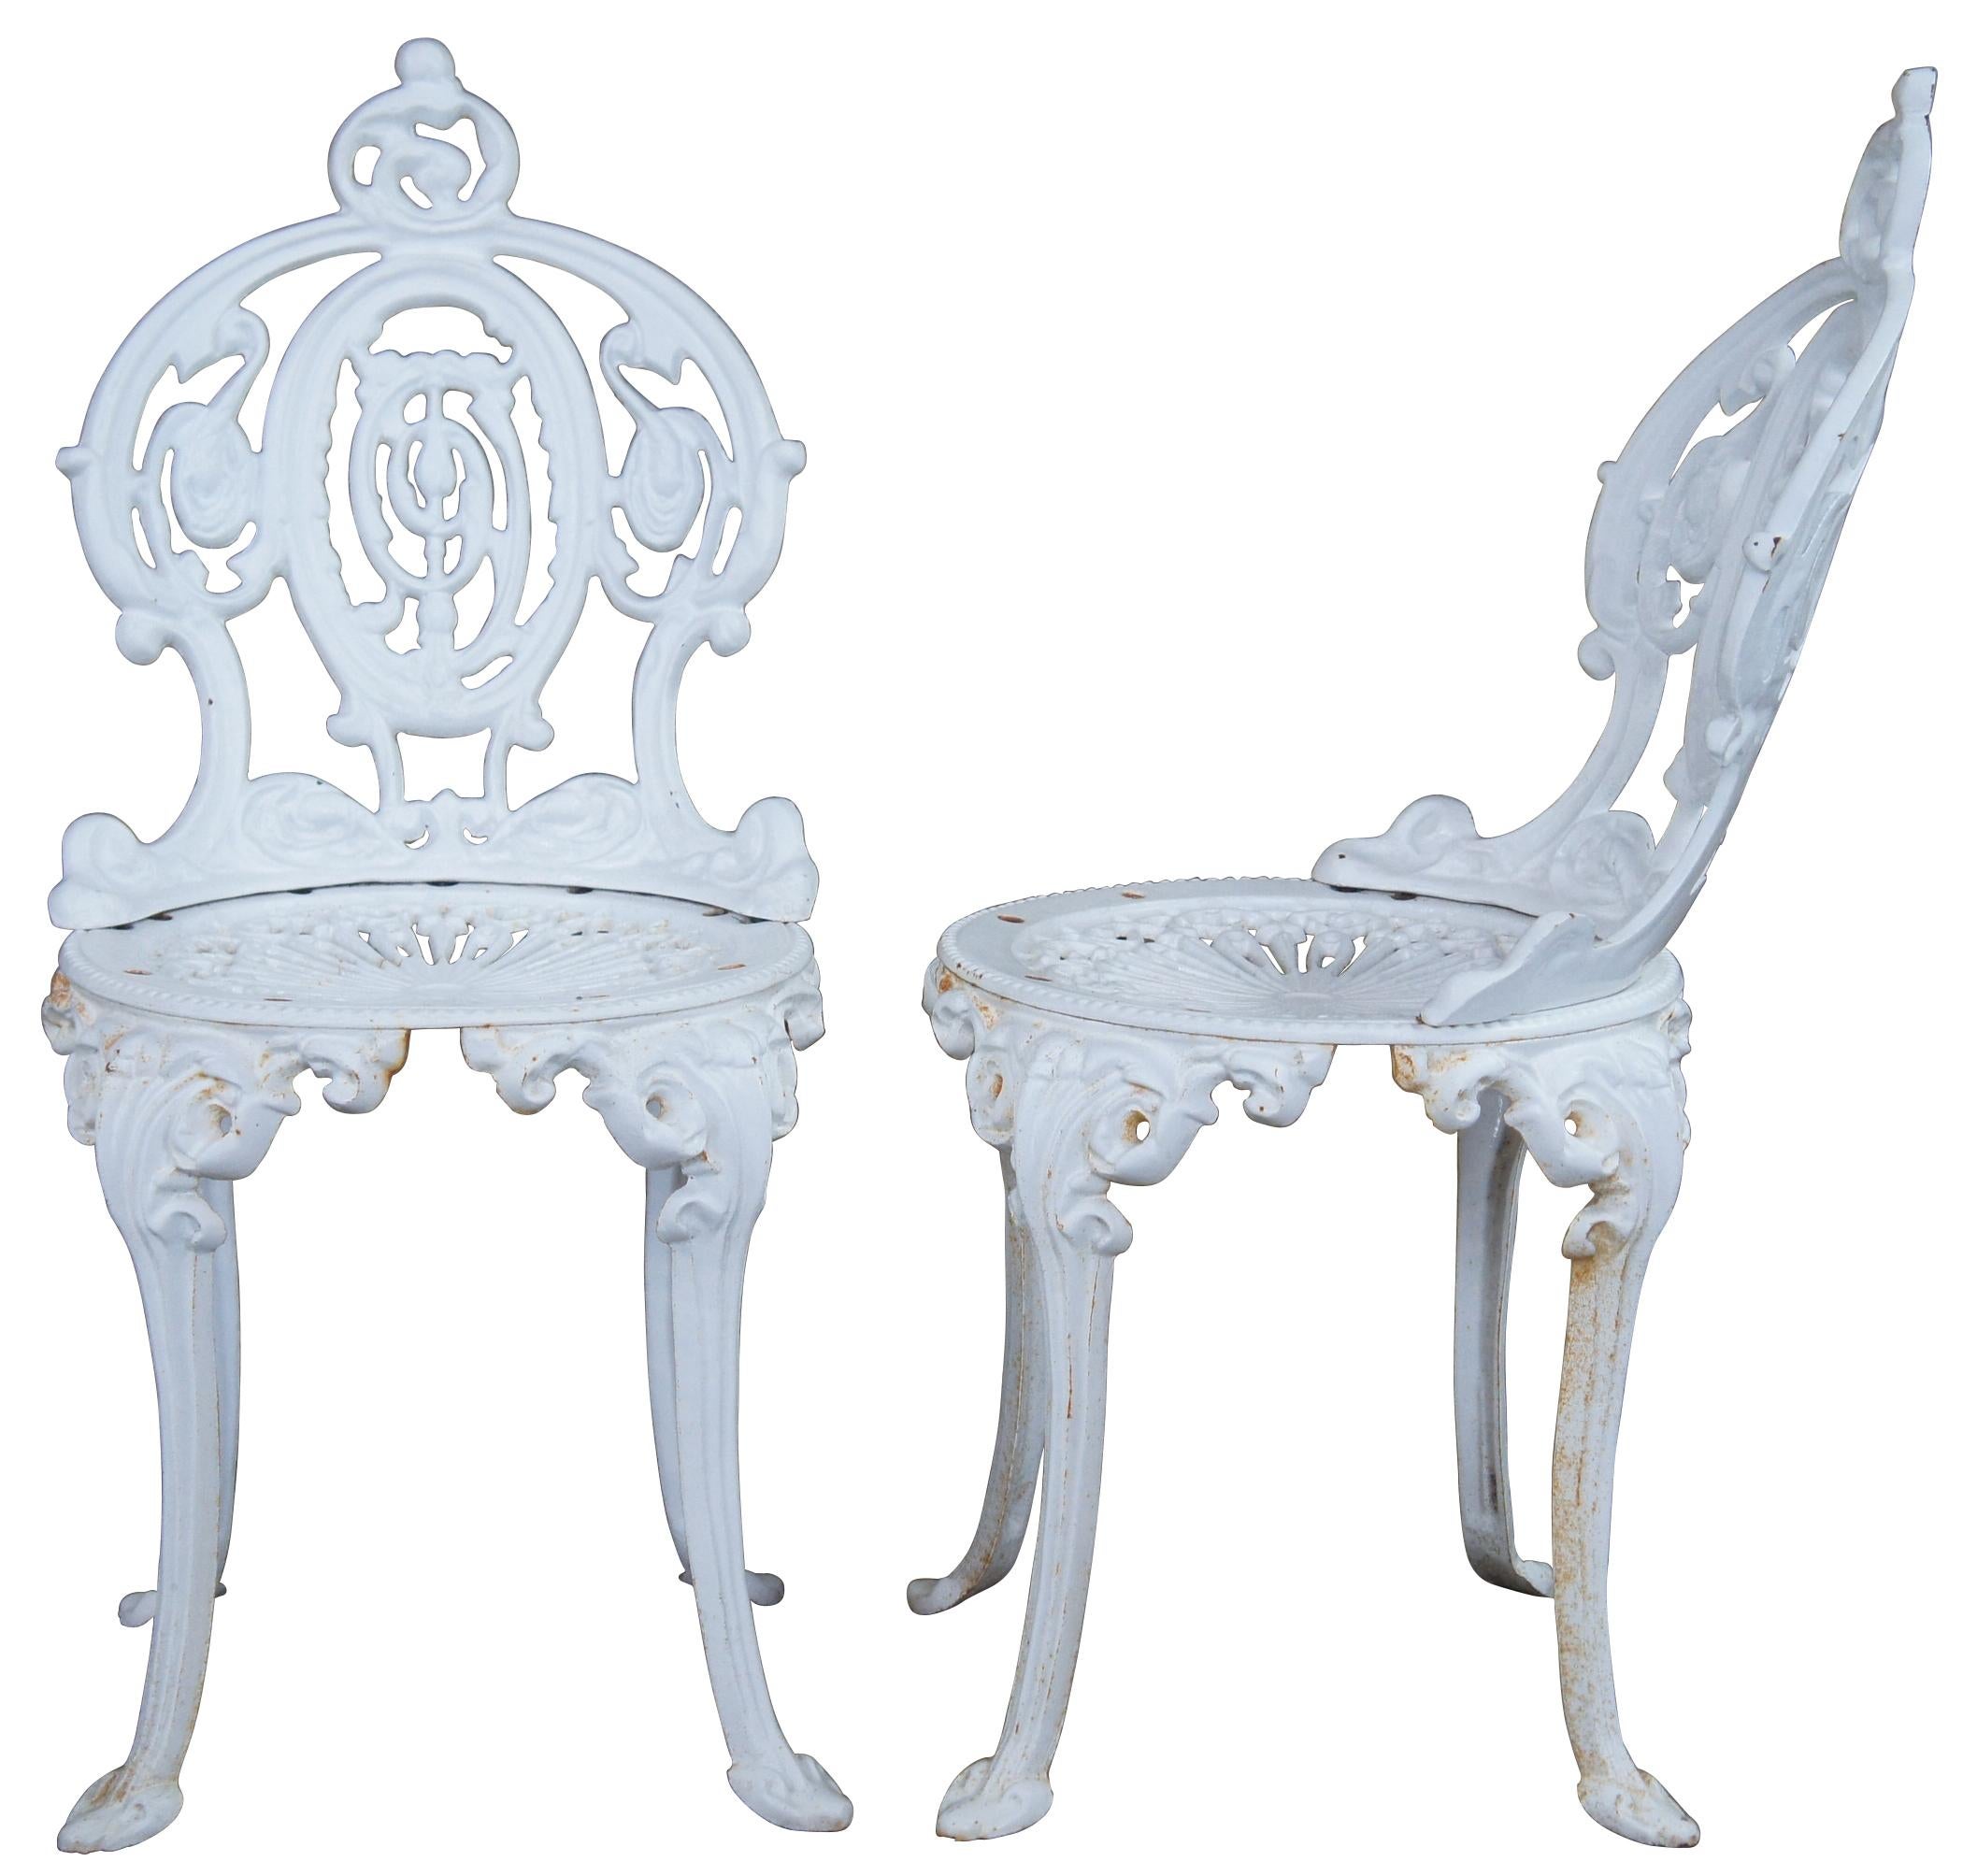 Seven antique French cast iron patio / garden / bistro chairs. Made of cast iron featuring an ornate design with crest and filigree seat. Very heavy.
 